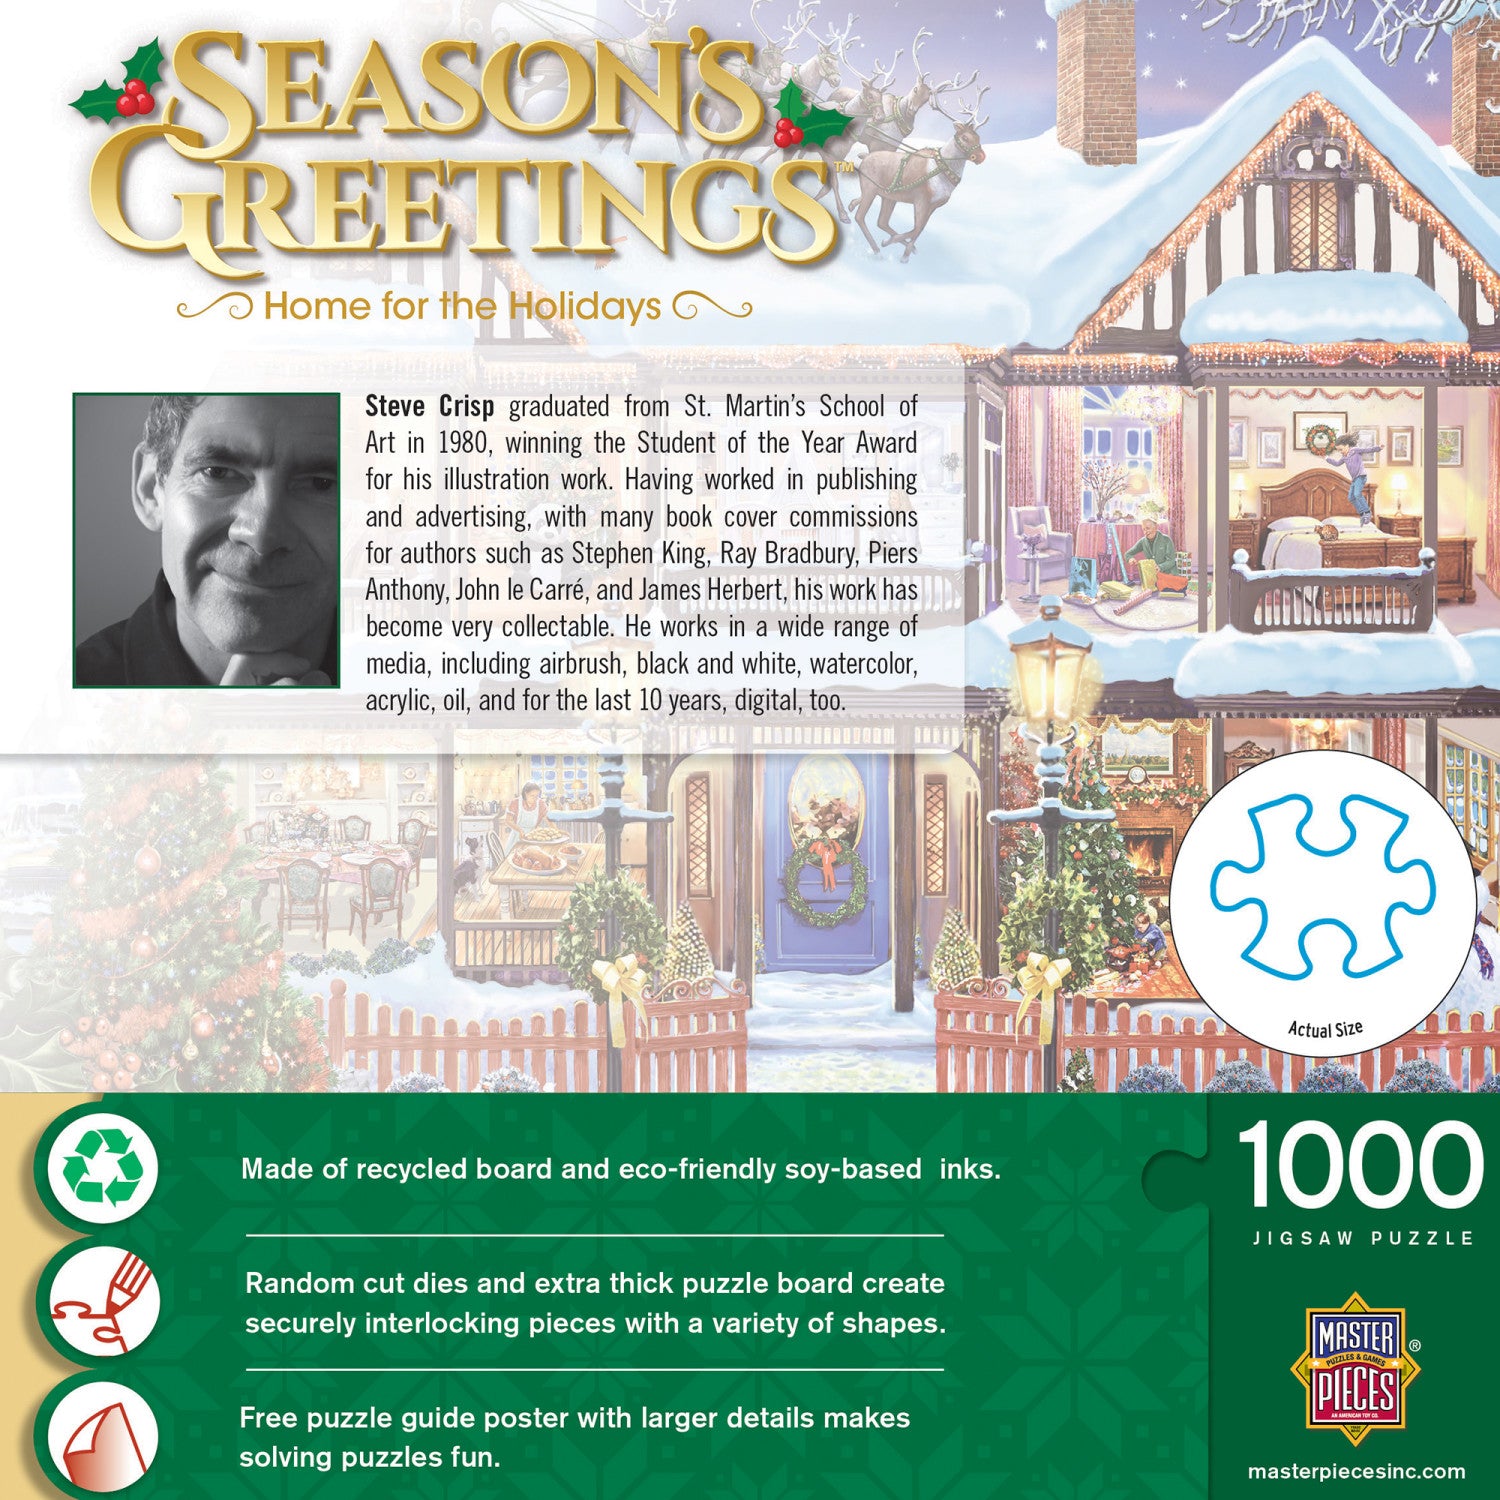 Season's Greetings - Home for the Holidays 1000 Piece Puzzle